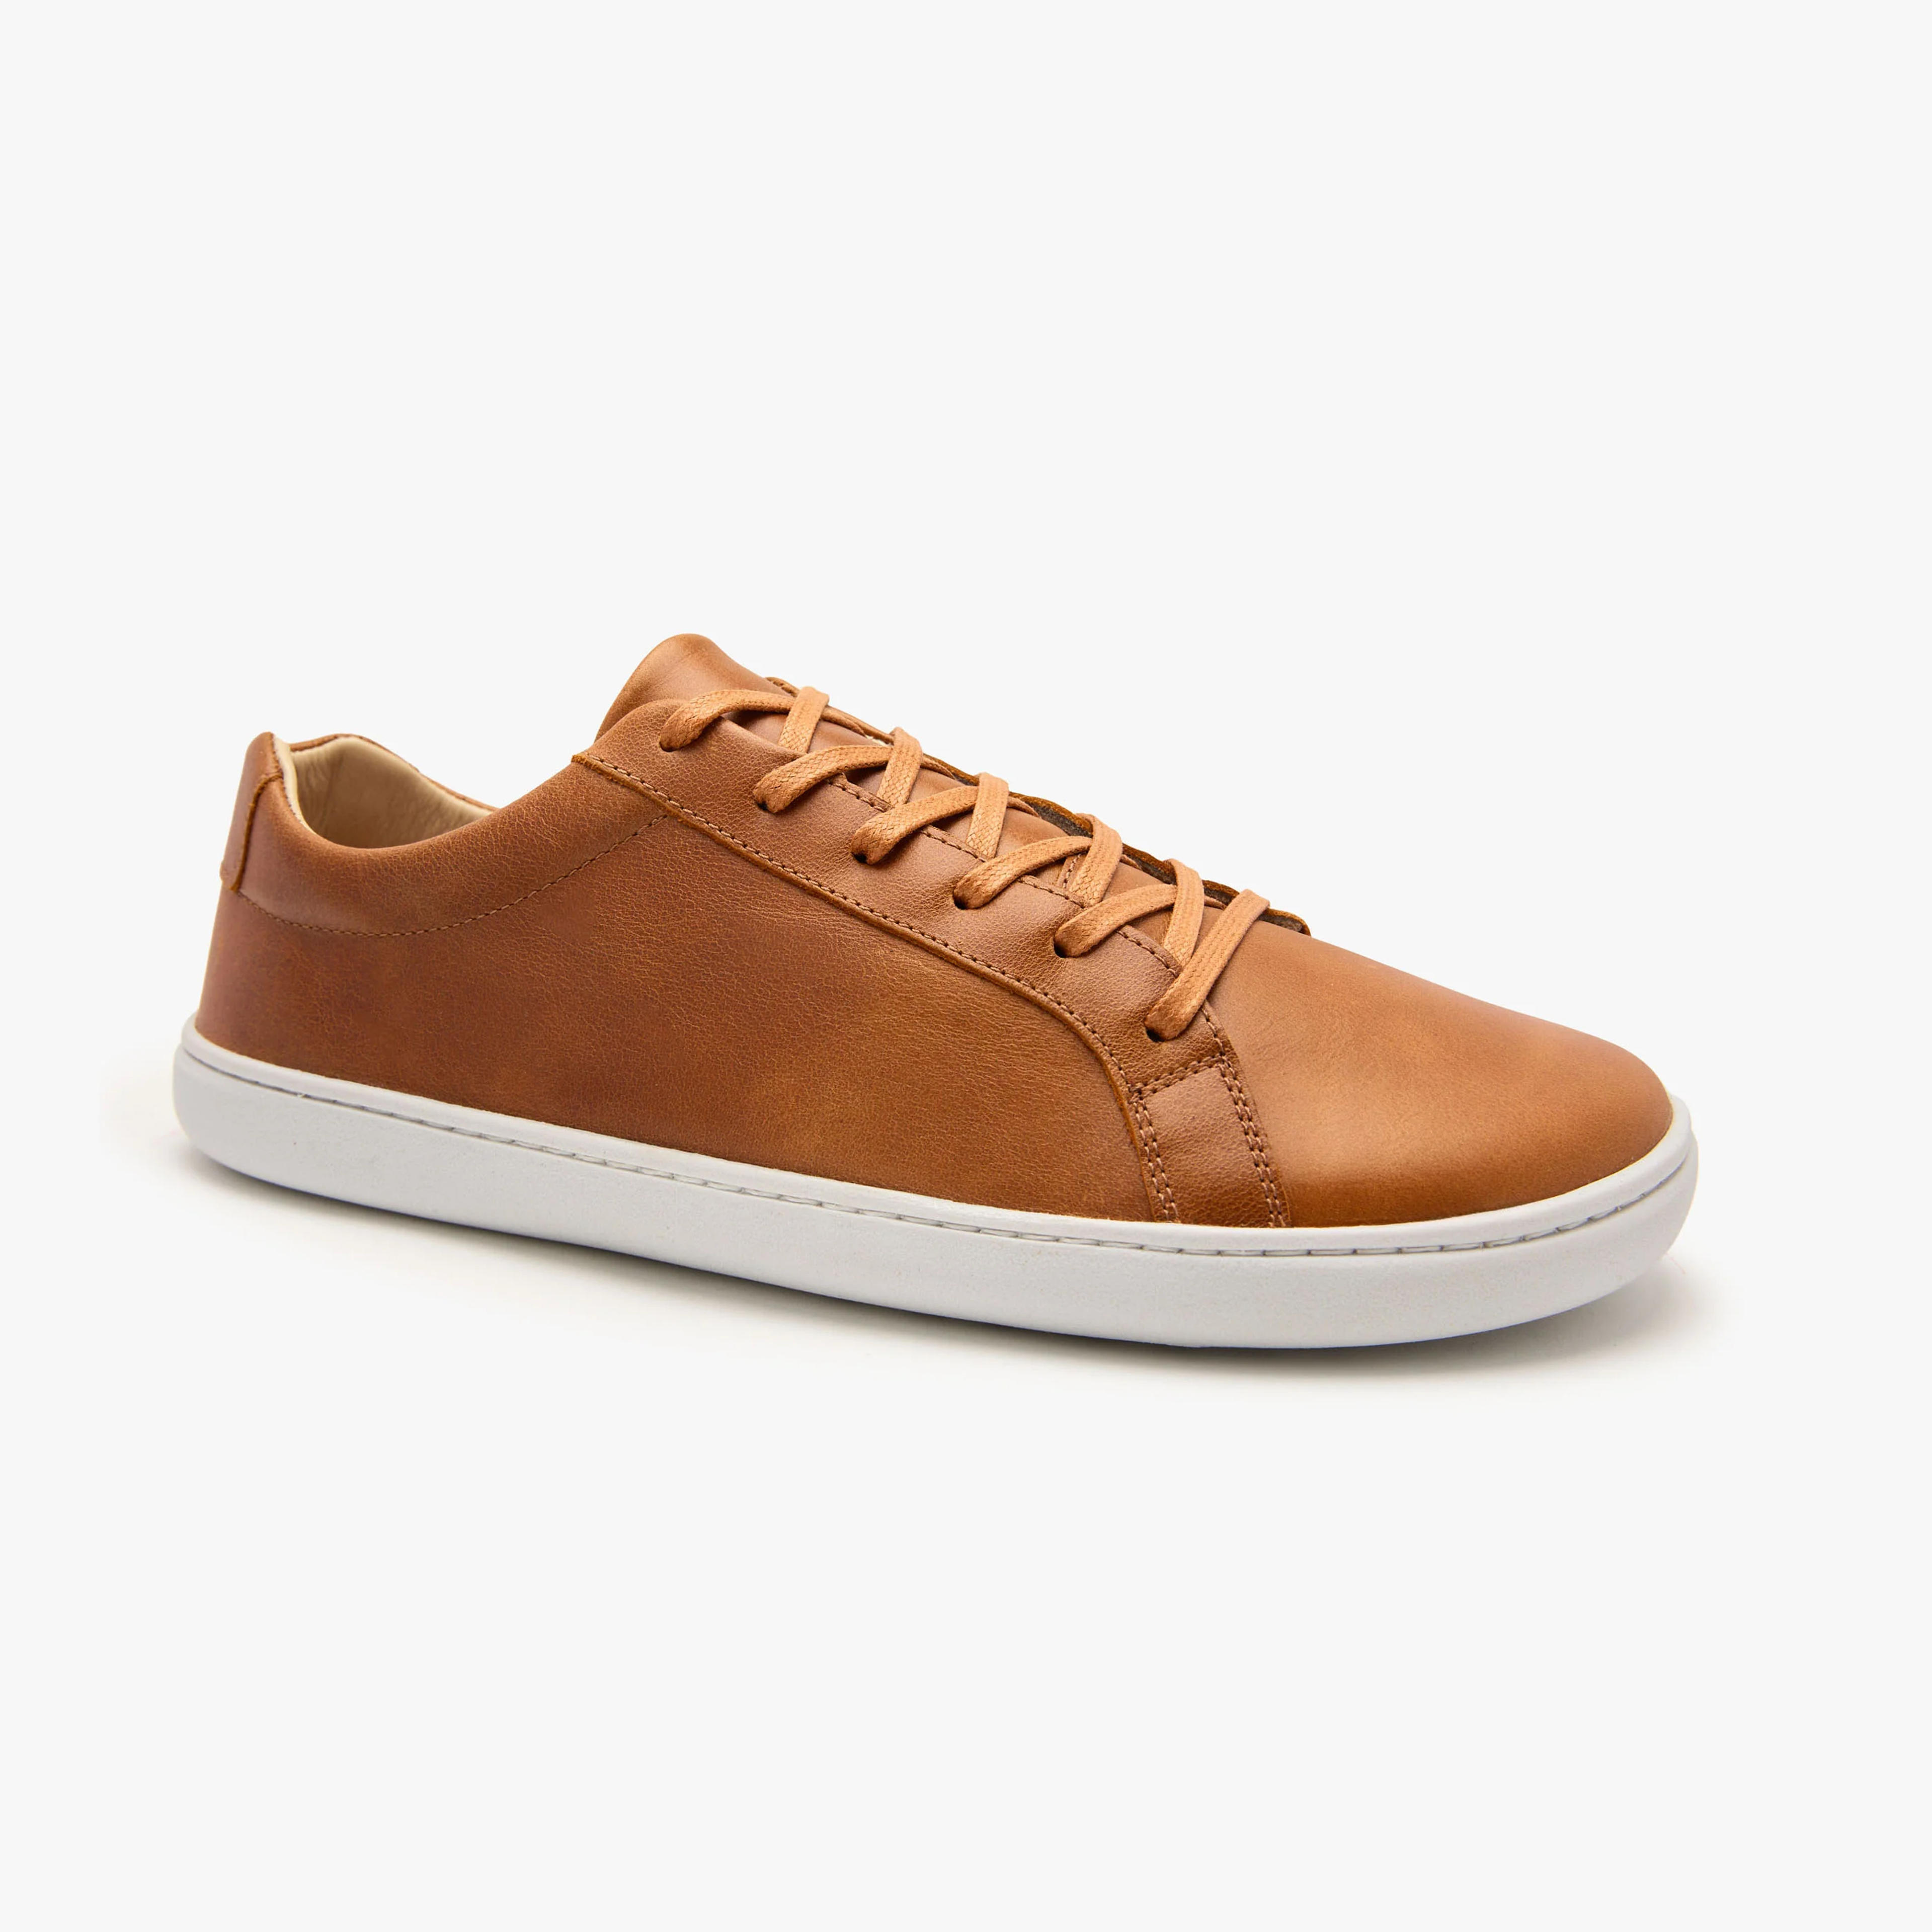 Barefoot shoes - Men - Black - Natural Leather - The Everyday Sneaker – Origo Shoes